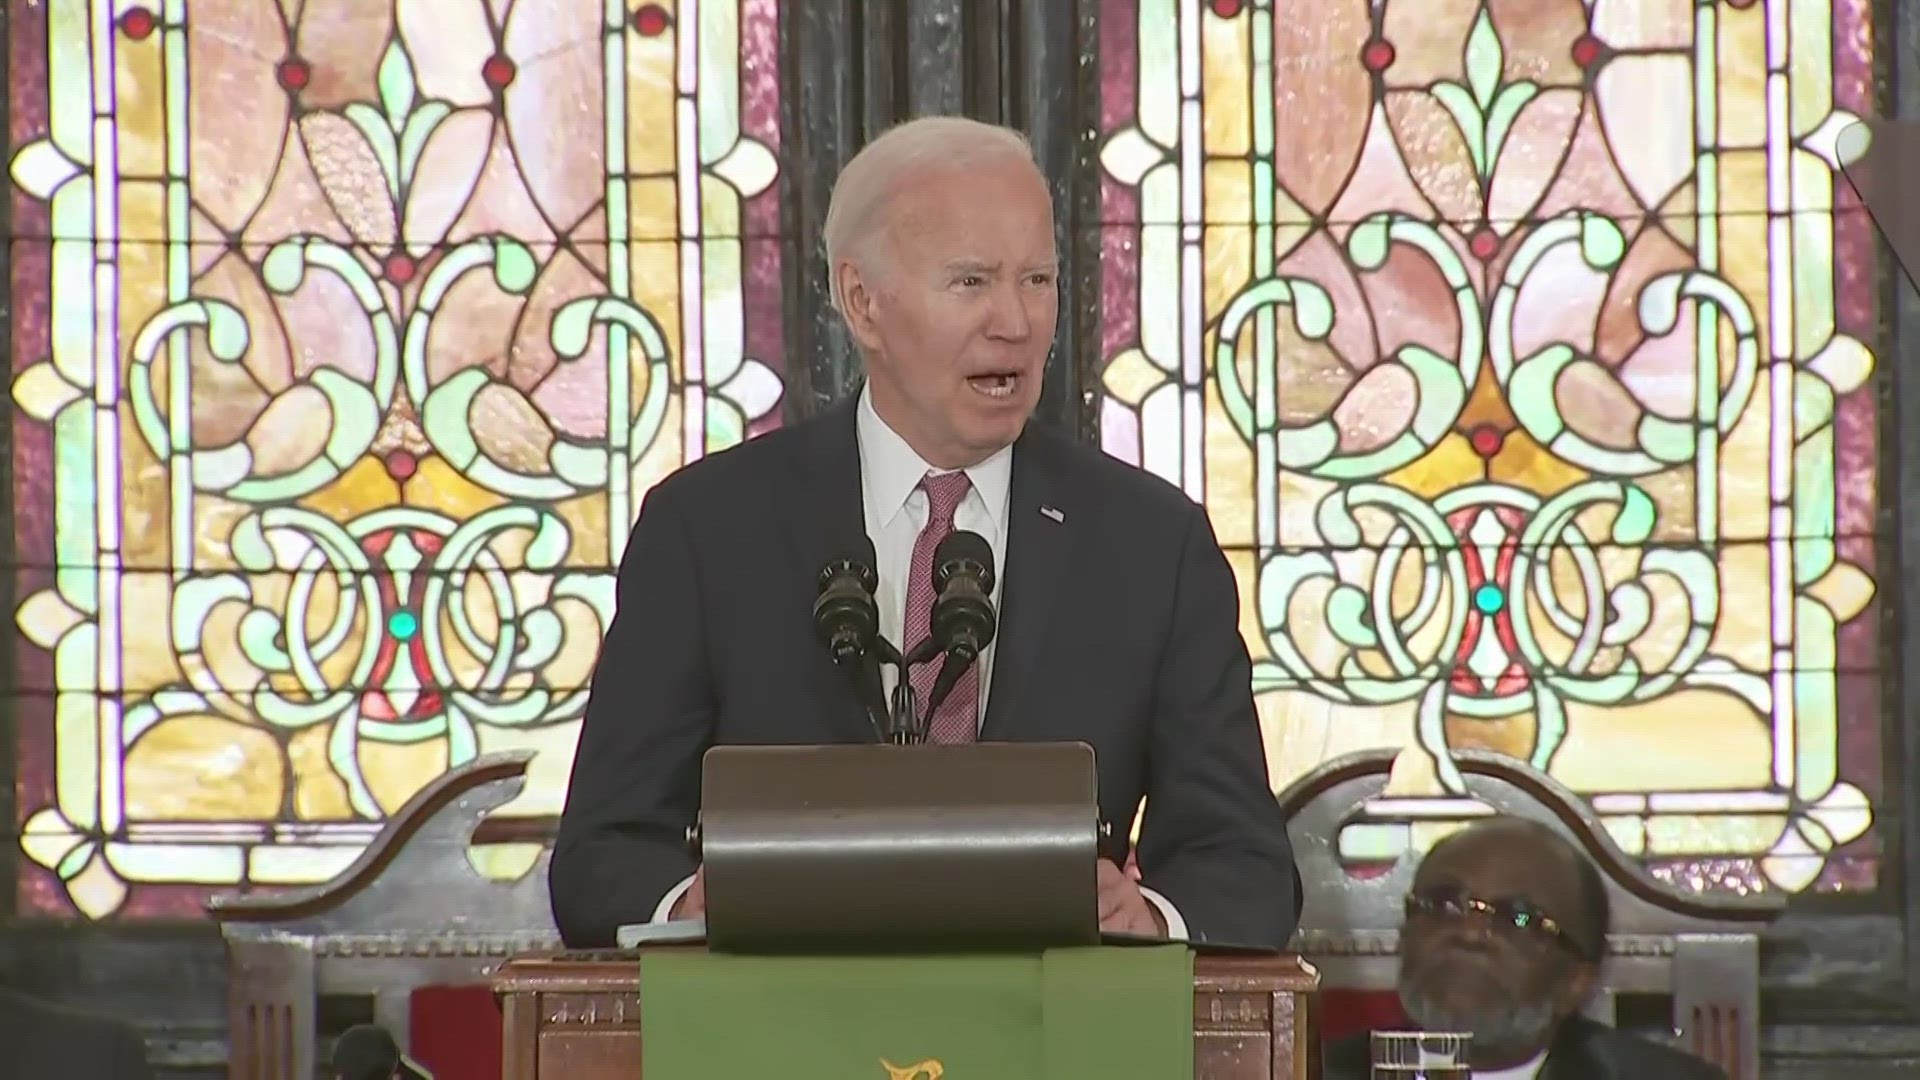 President Joe Biden on Monday denounced the “poison” of white supremacy in America, saying at the site of a deadly racist shooting that left 9 dead.